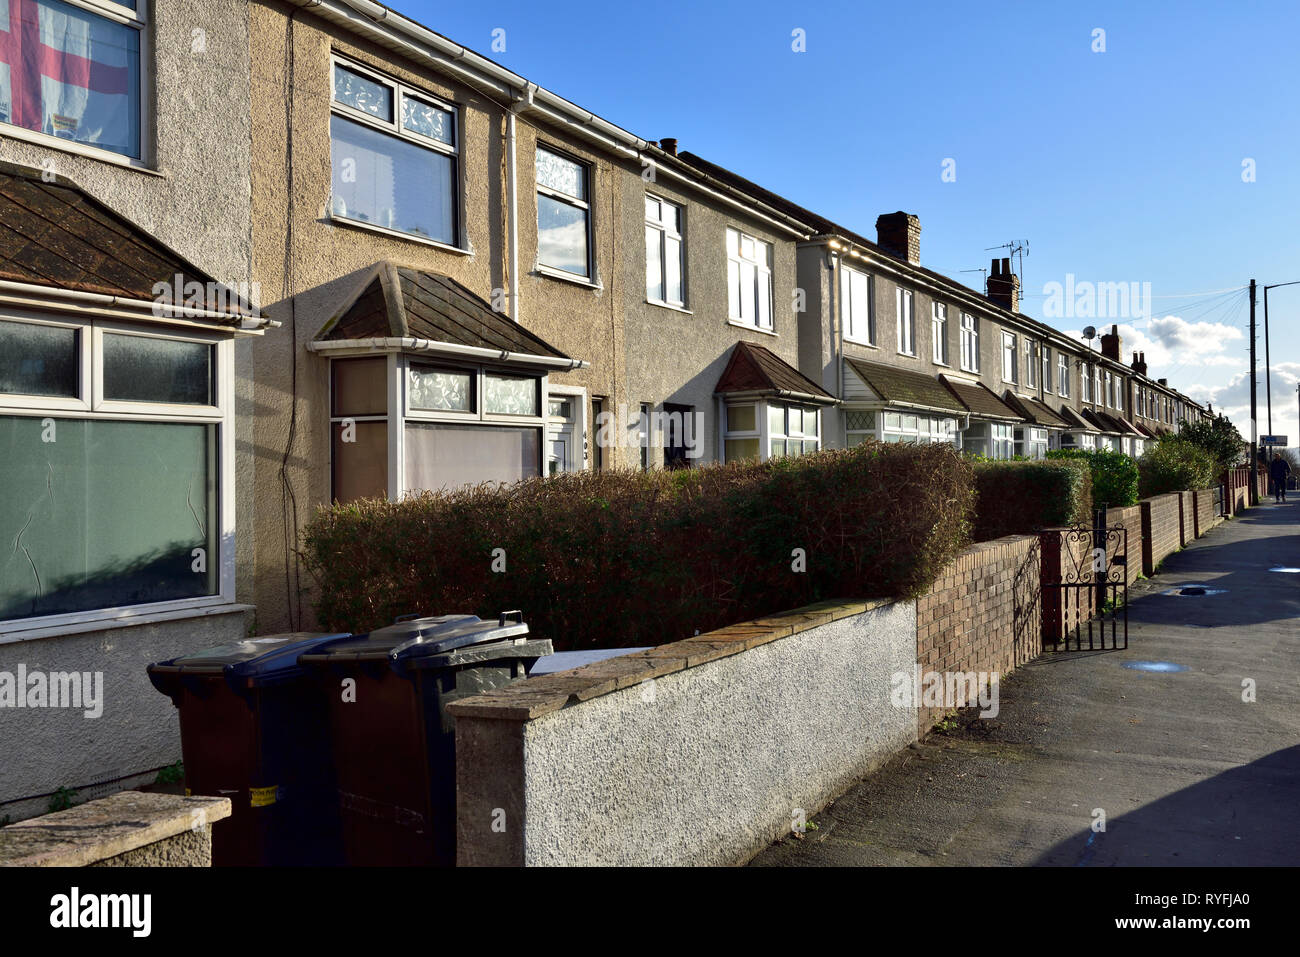 Row of terrace 1950s style houses in Horfield, Bristol, England Stock Photo